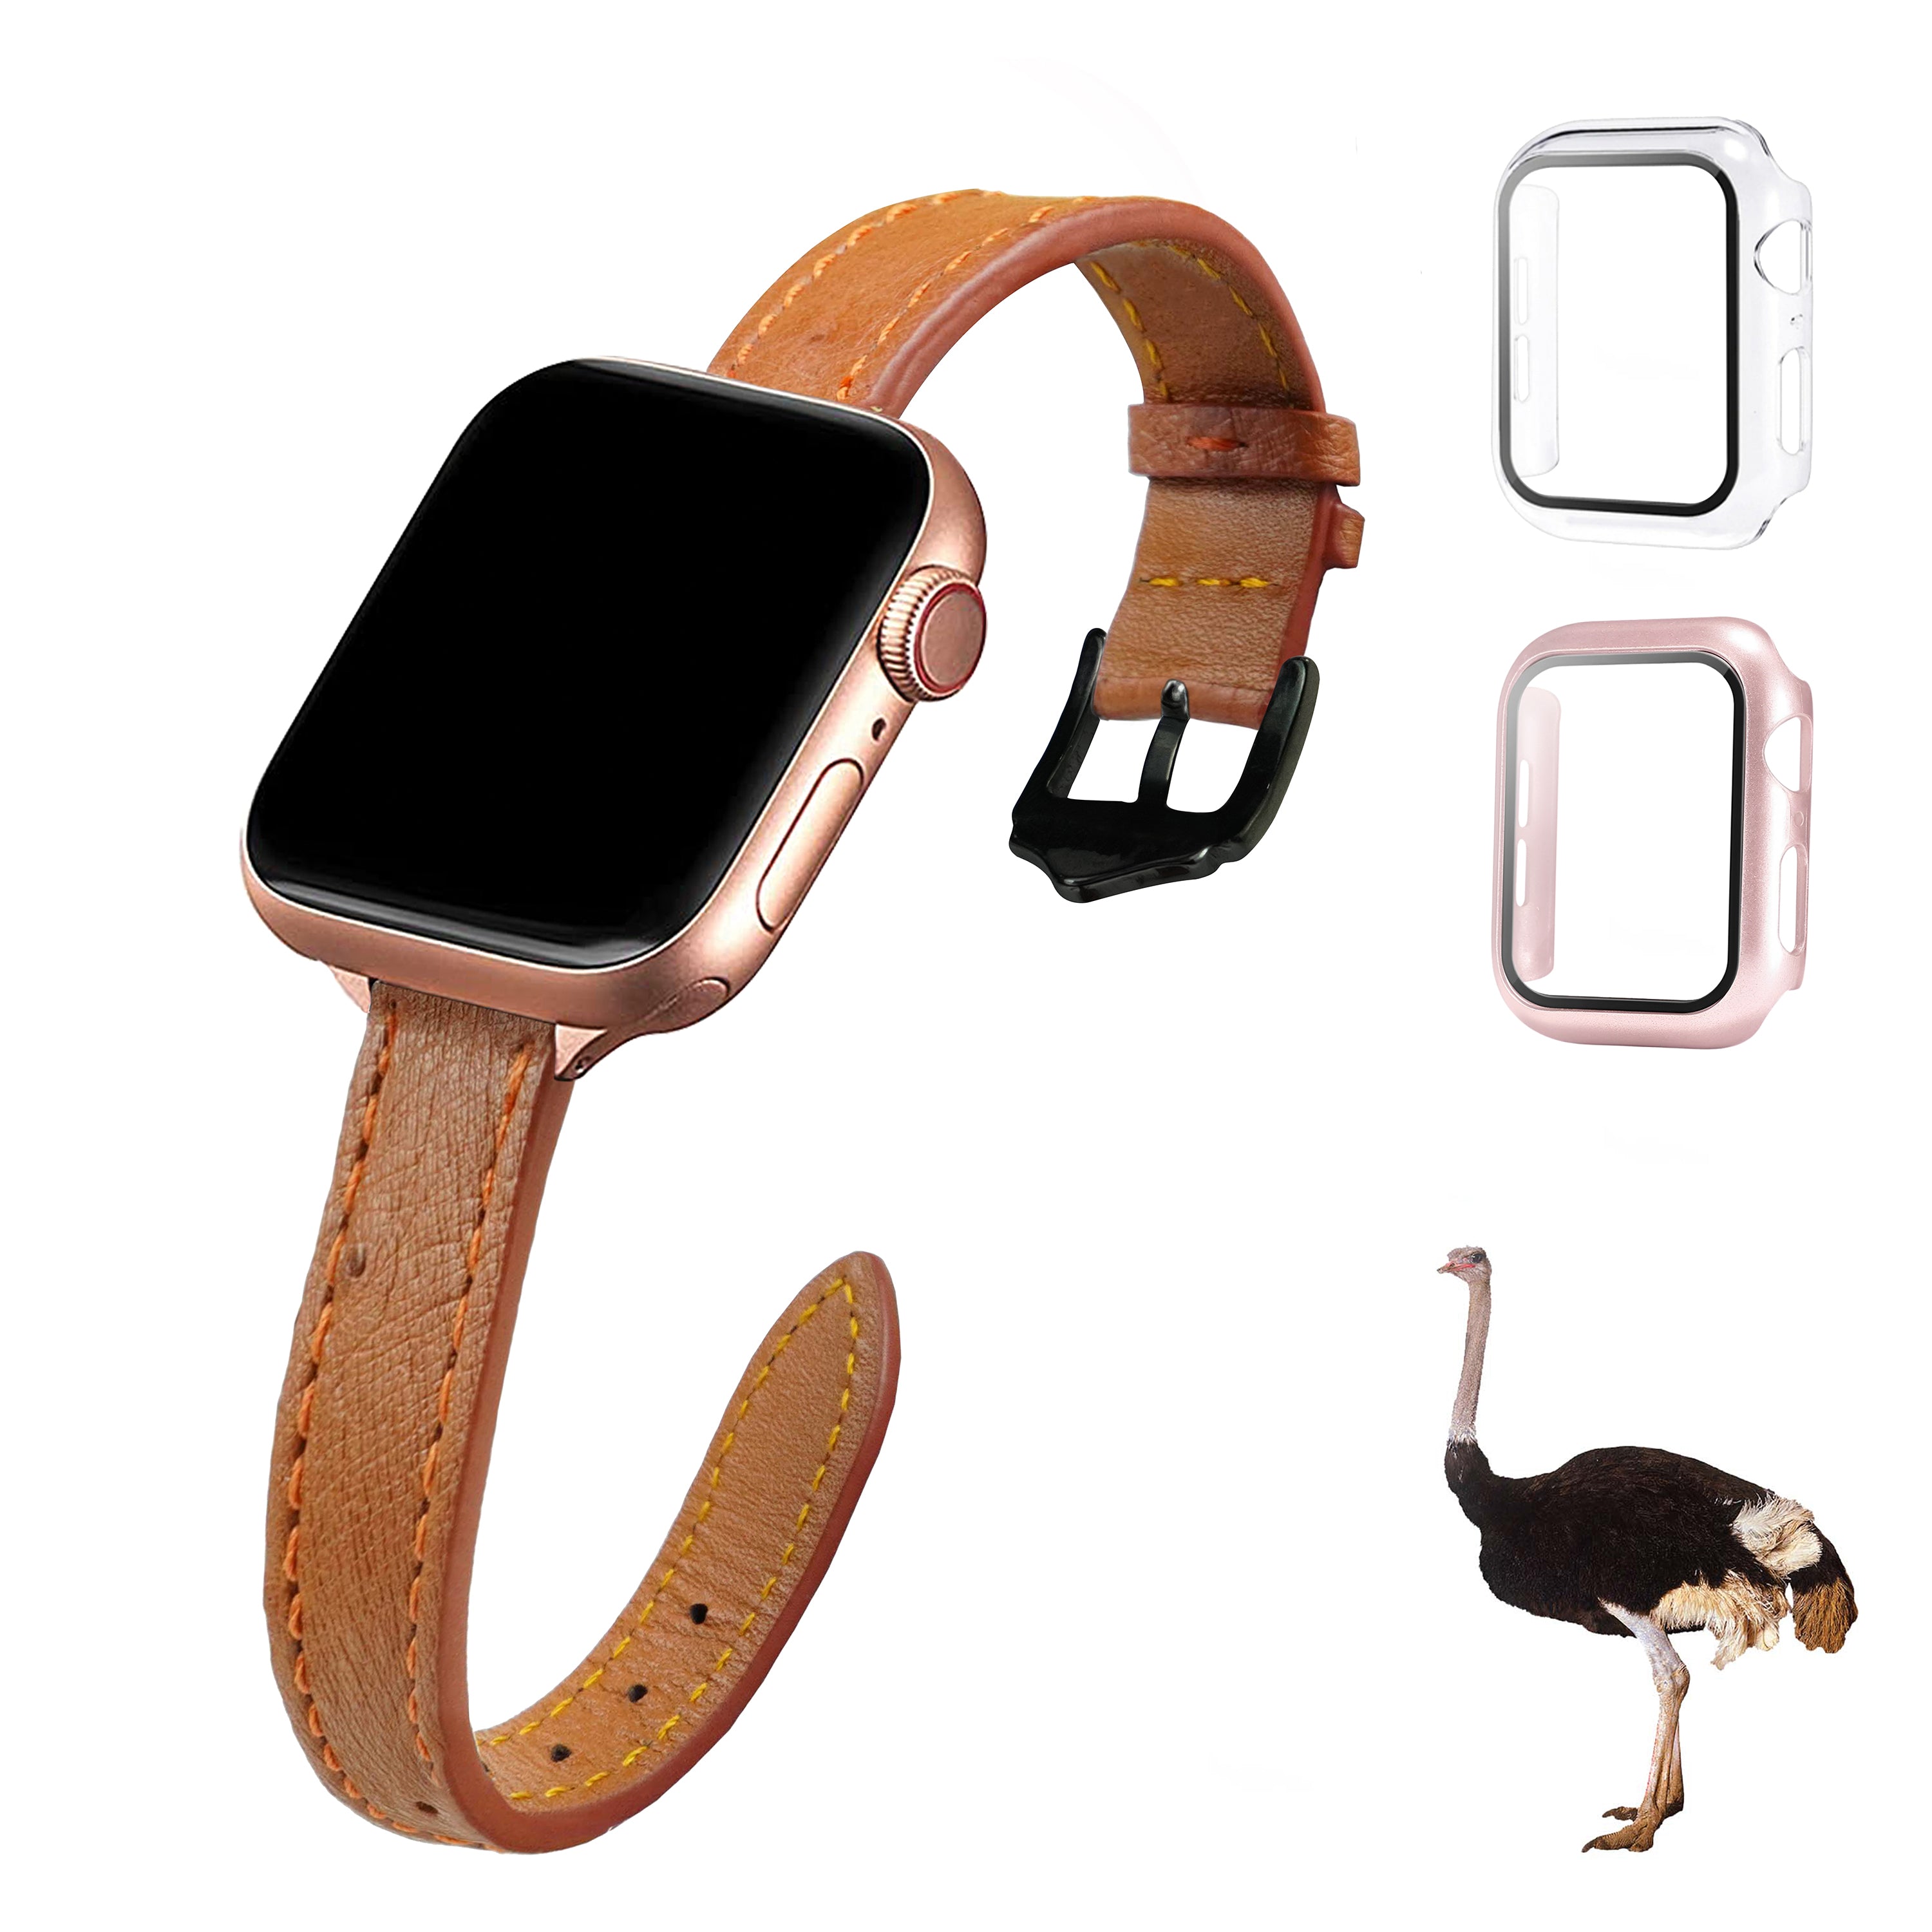 Light Brown Flat Ostrich Leather Band Compatible Apple Watch Iwatch 42mm Screen Protector Case Black Adapter Replacement Strap For Smartwatch Series 1 2 3 Leather Handmade AW-186B-W-42MM